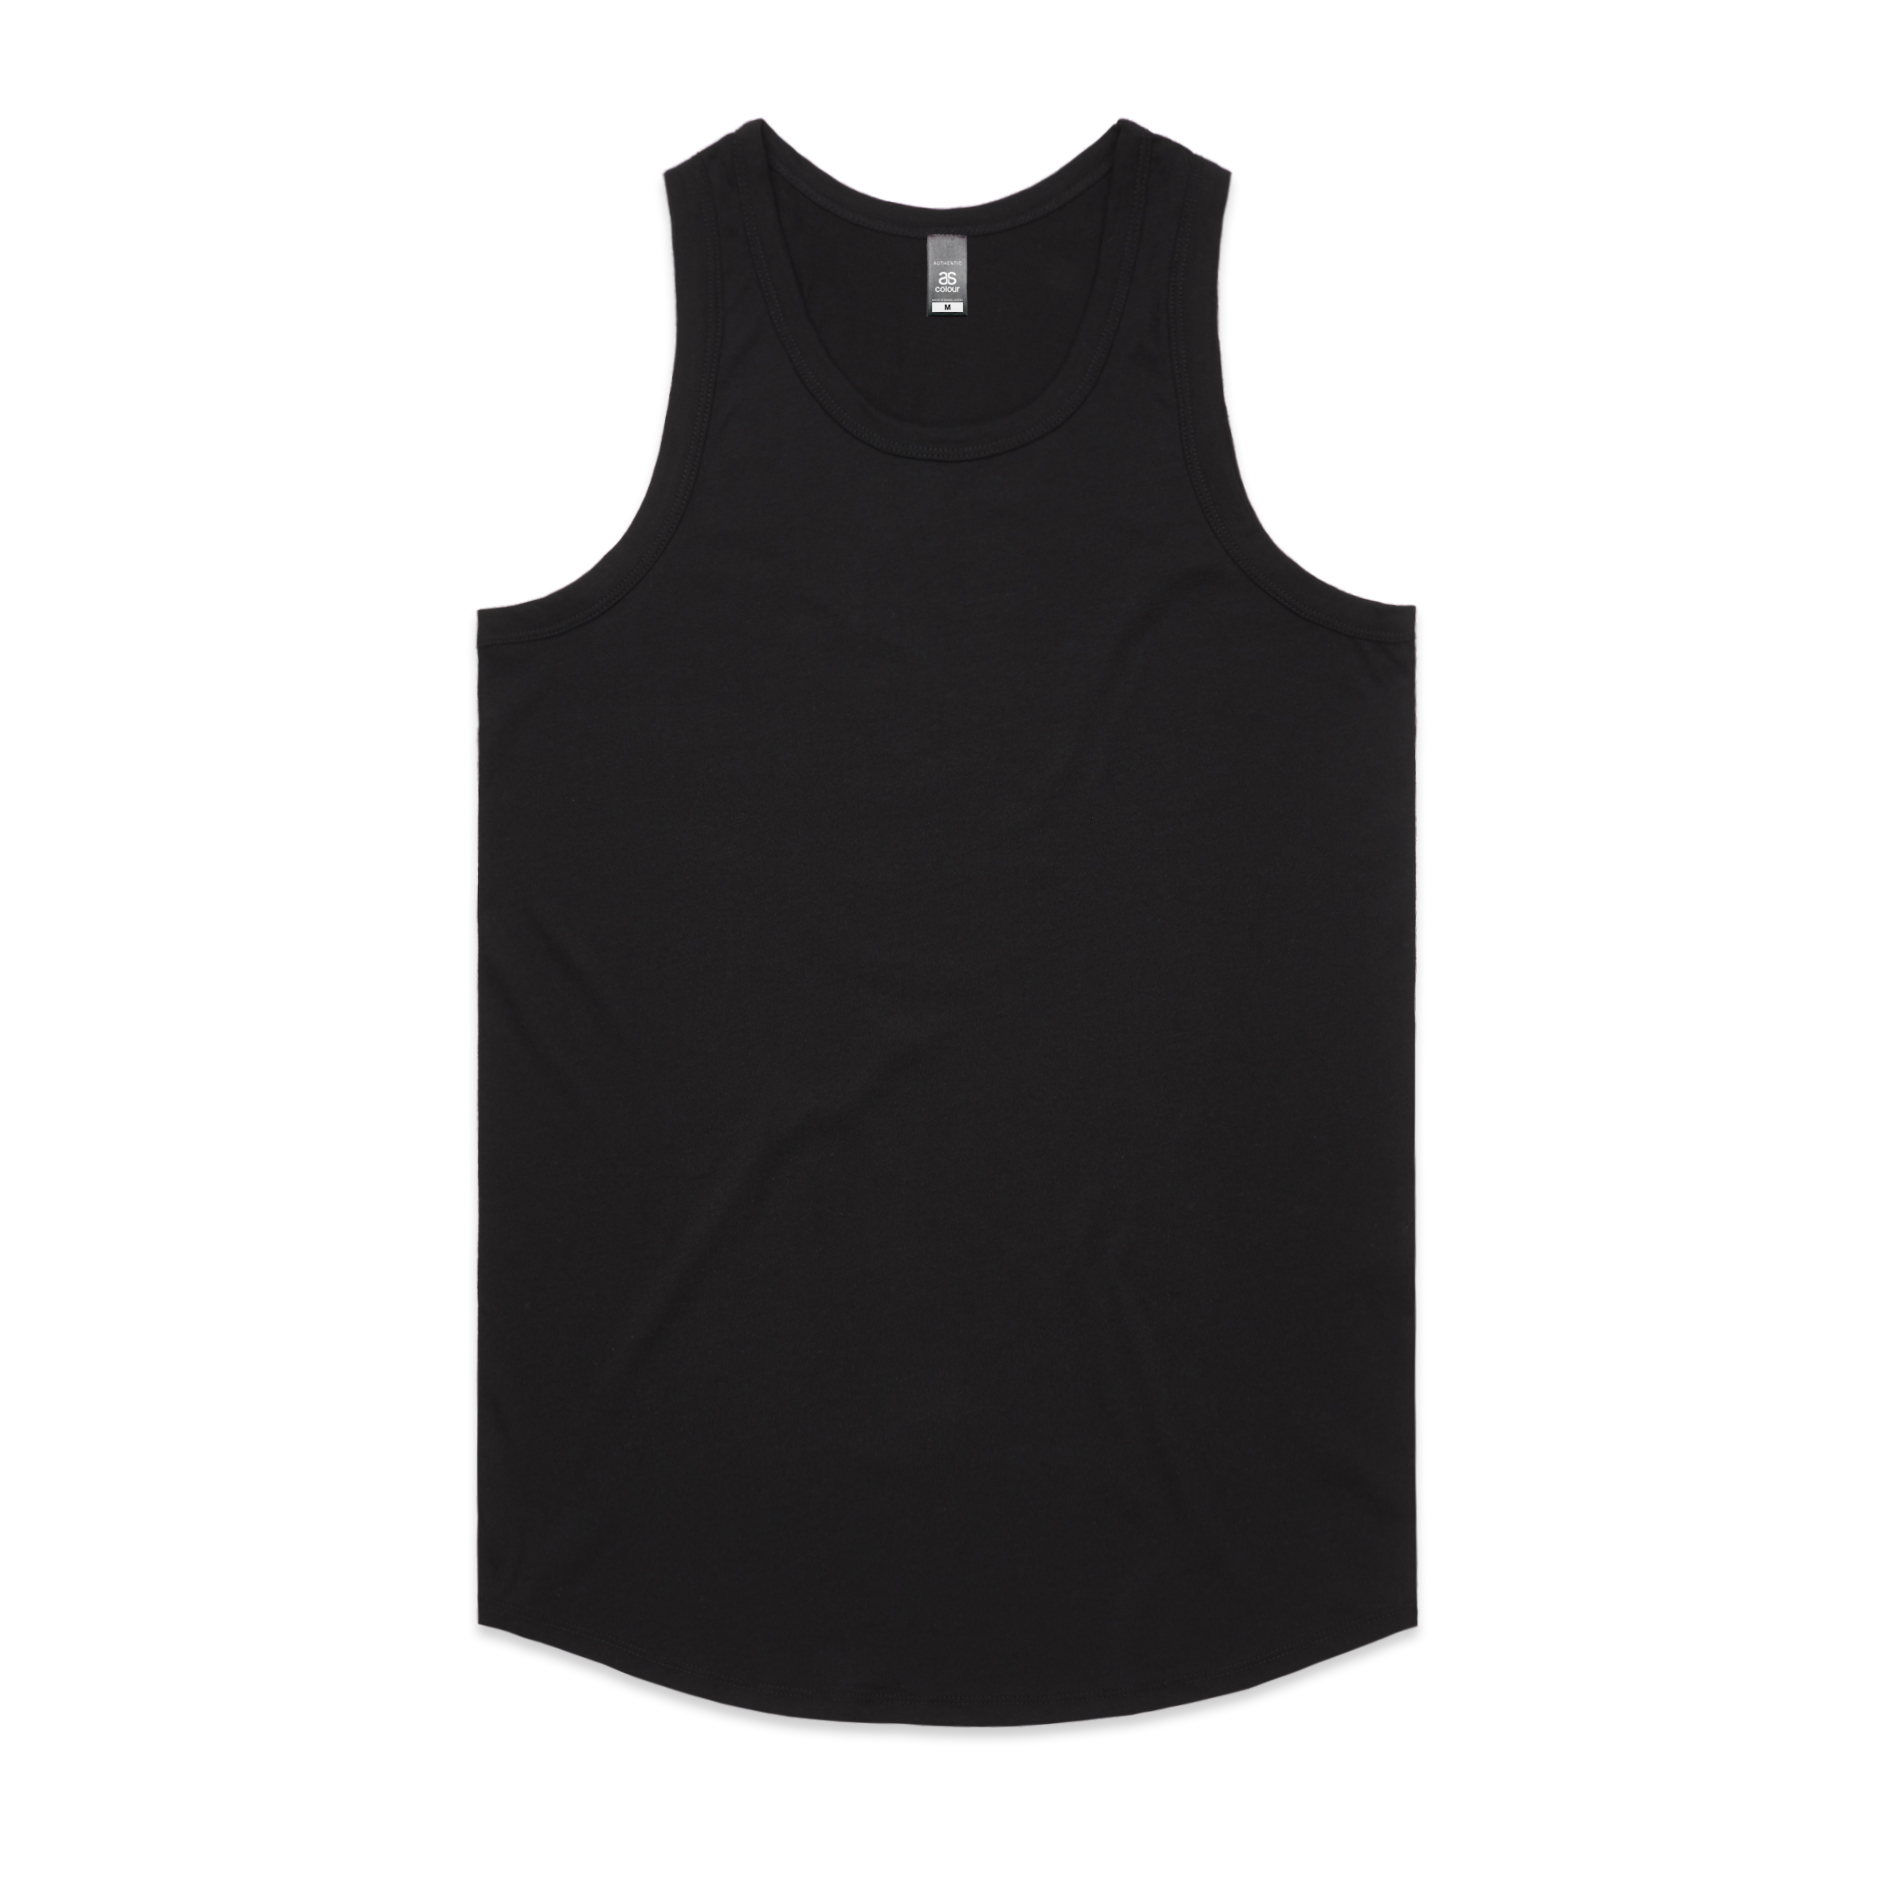 Authentic Singlet - Image Group